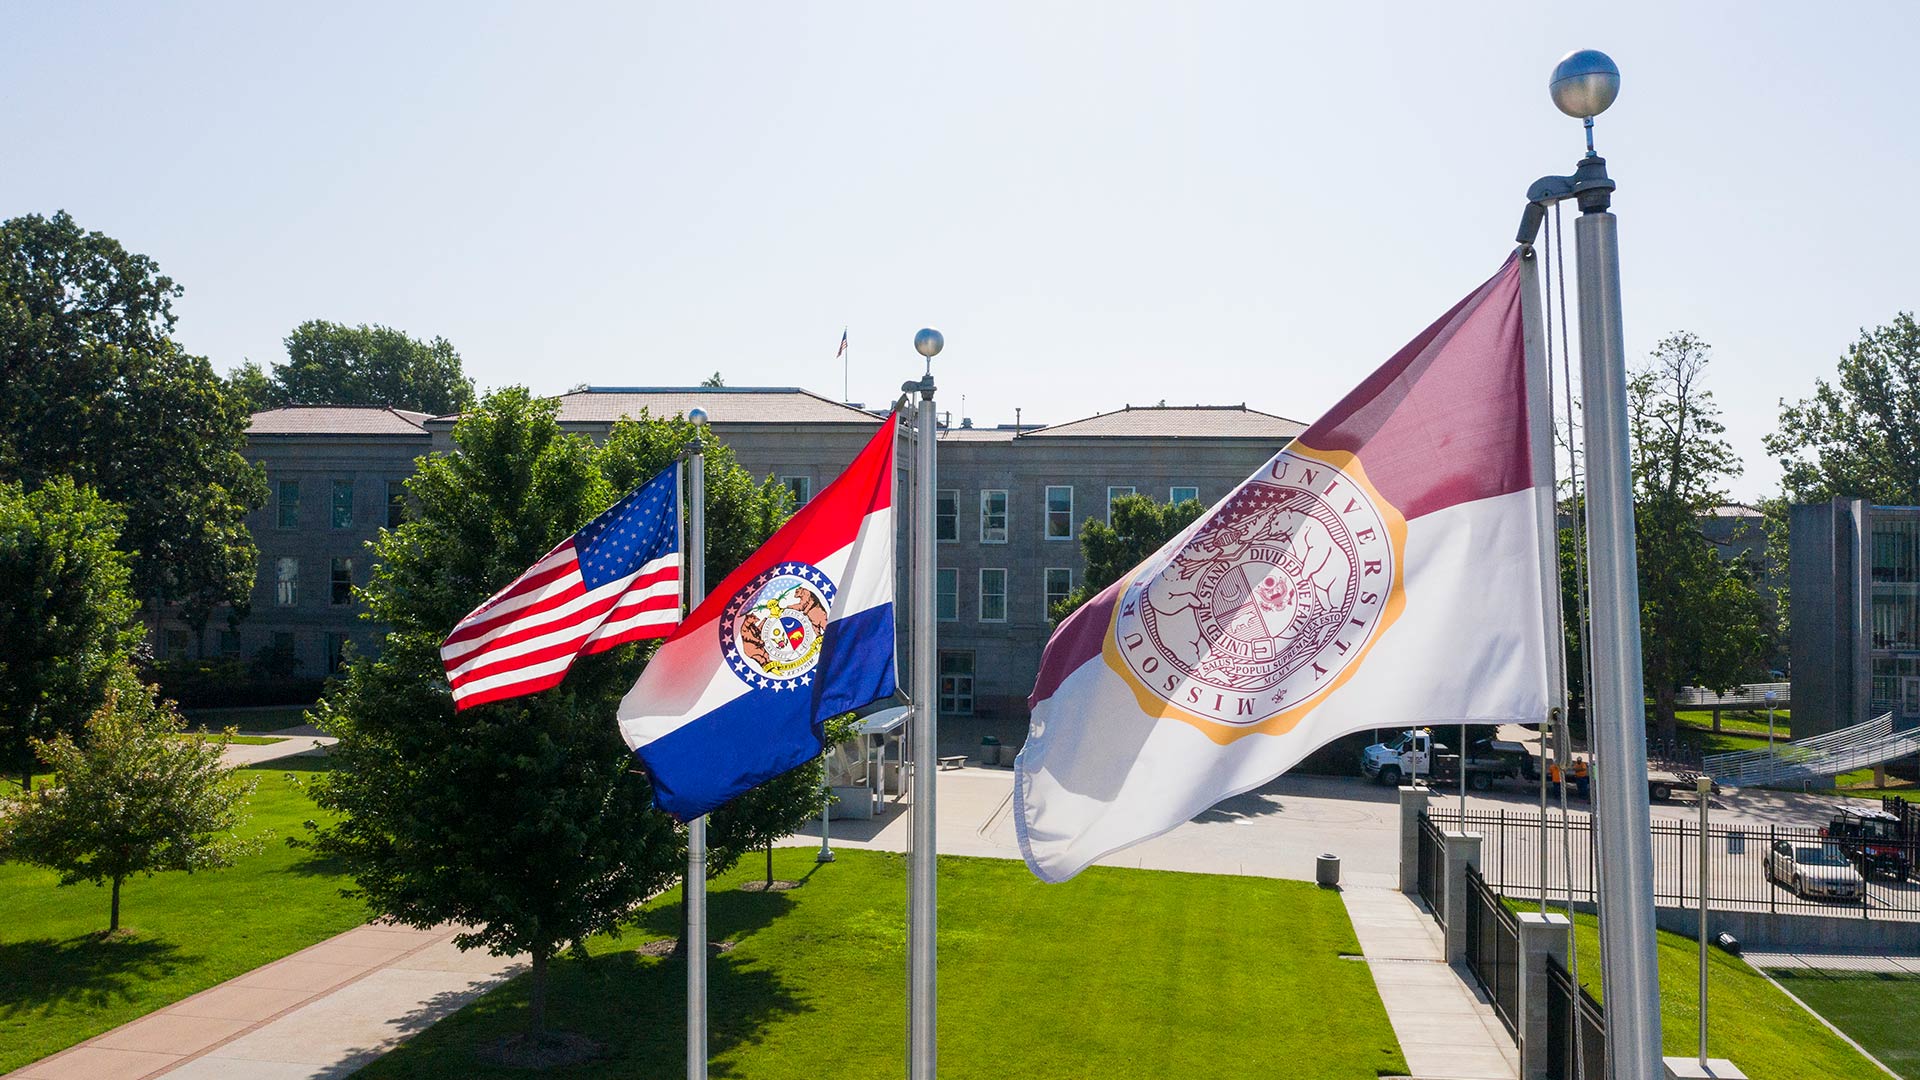 The U.S., Missouri, and Missouri State flags fly on campus